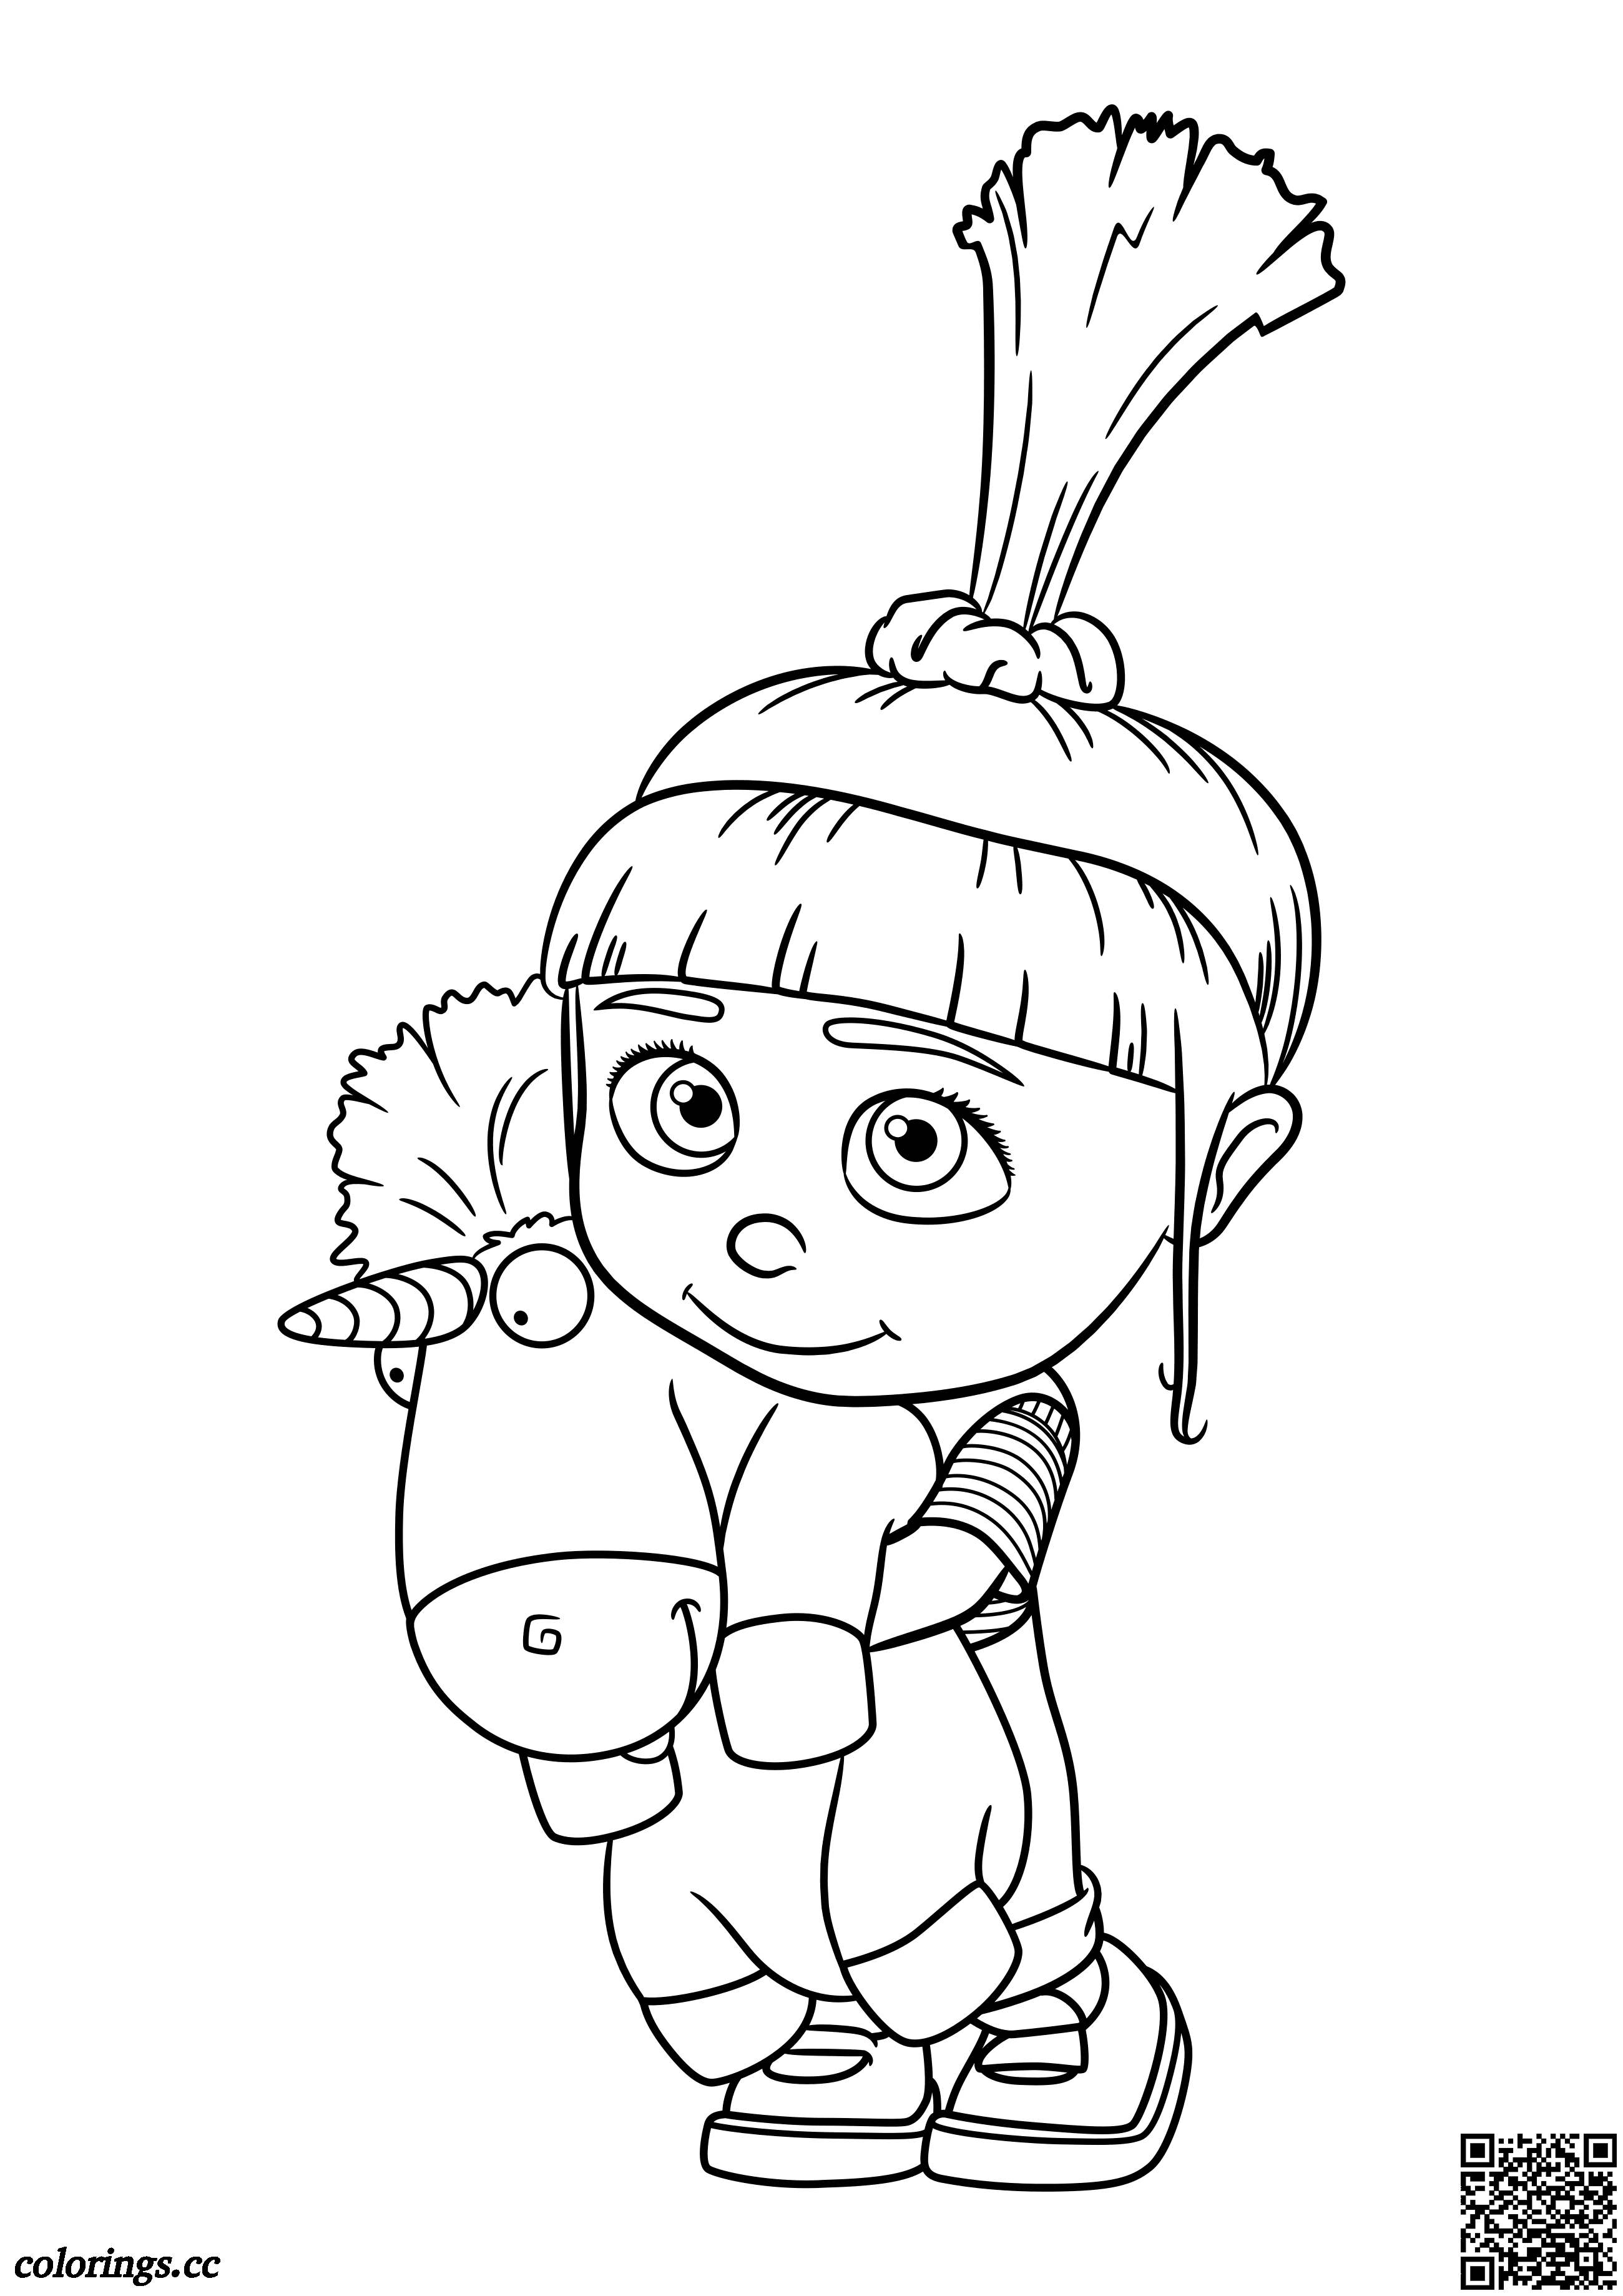 Agnes with a Unicorn coloring pages, Despicable me 3 coloring pages ...